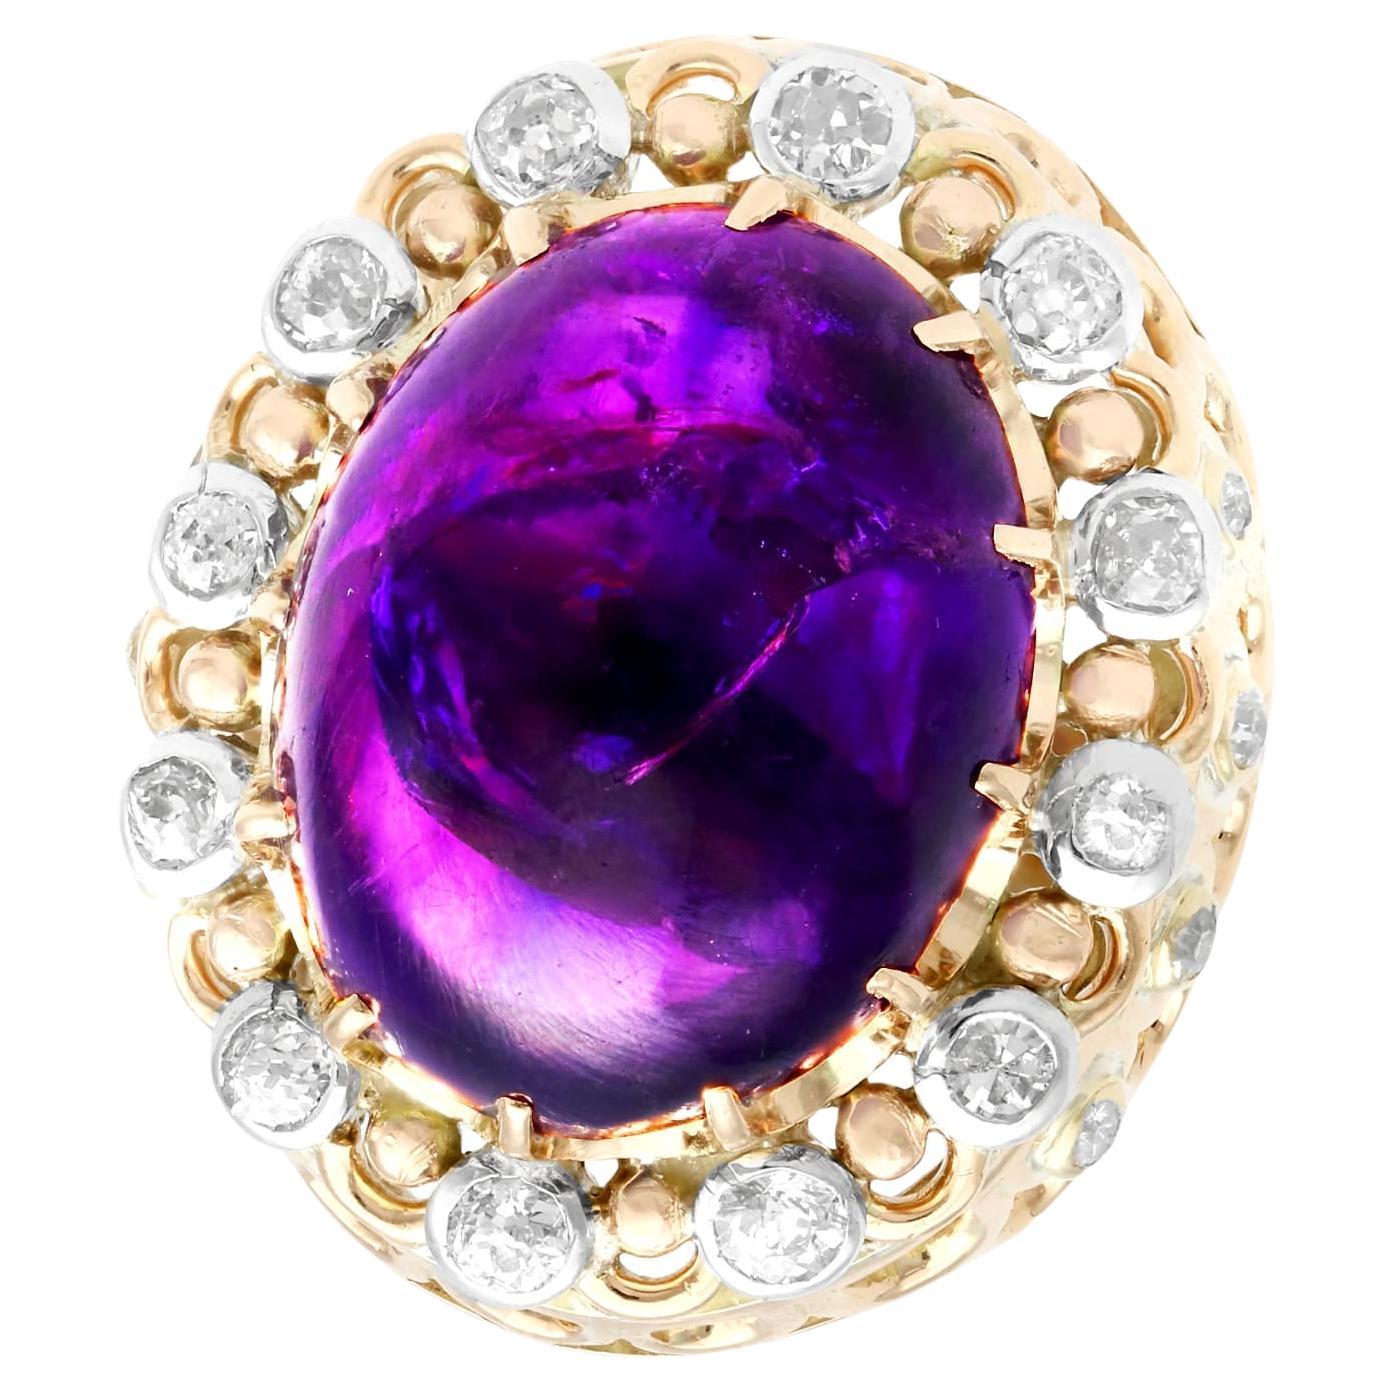 21.43 Carat Cabochon Cut Amethyst and 1.07 Carat Diamond Yellow Gold Ring For Sale